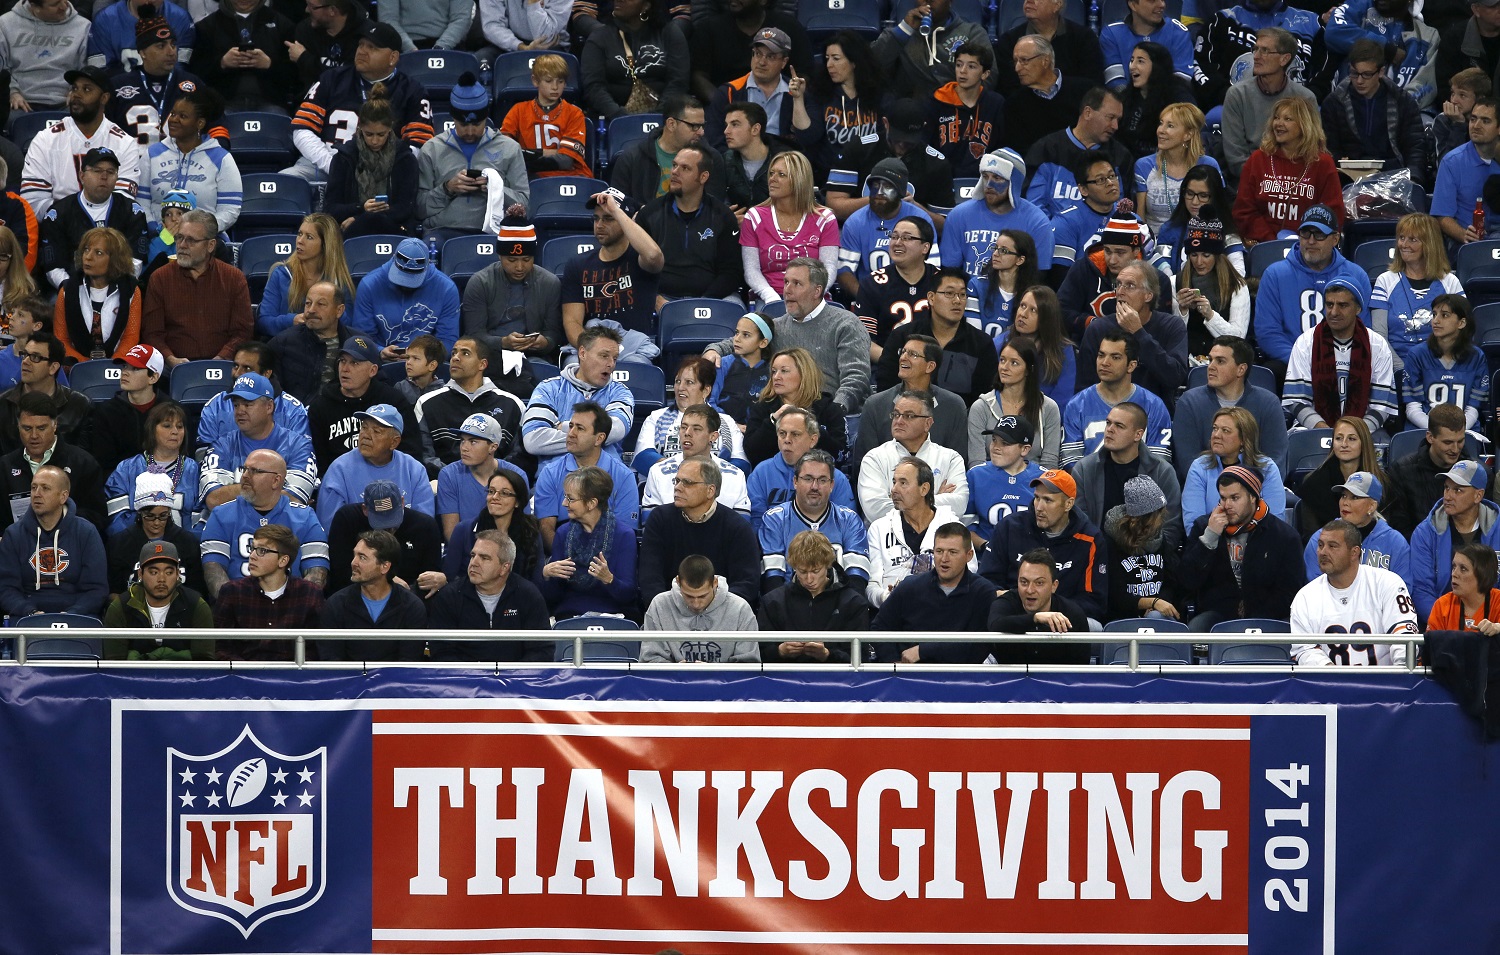 NFL football fans watch during an NFL football game on Thanksgiving day between the Detroit Lions and Chicago Bears in Detroit Thursday, Nov. 27, 2014. (AP Photo/Paul Sancya)